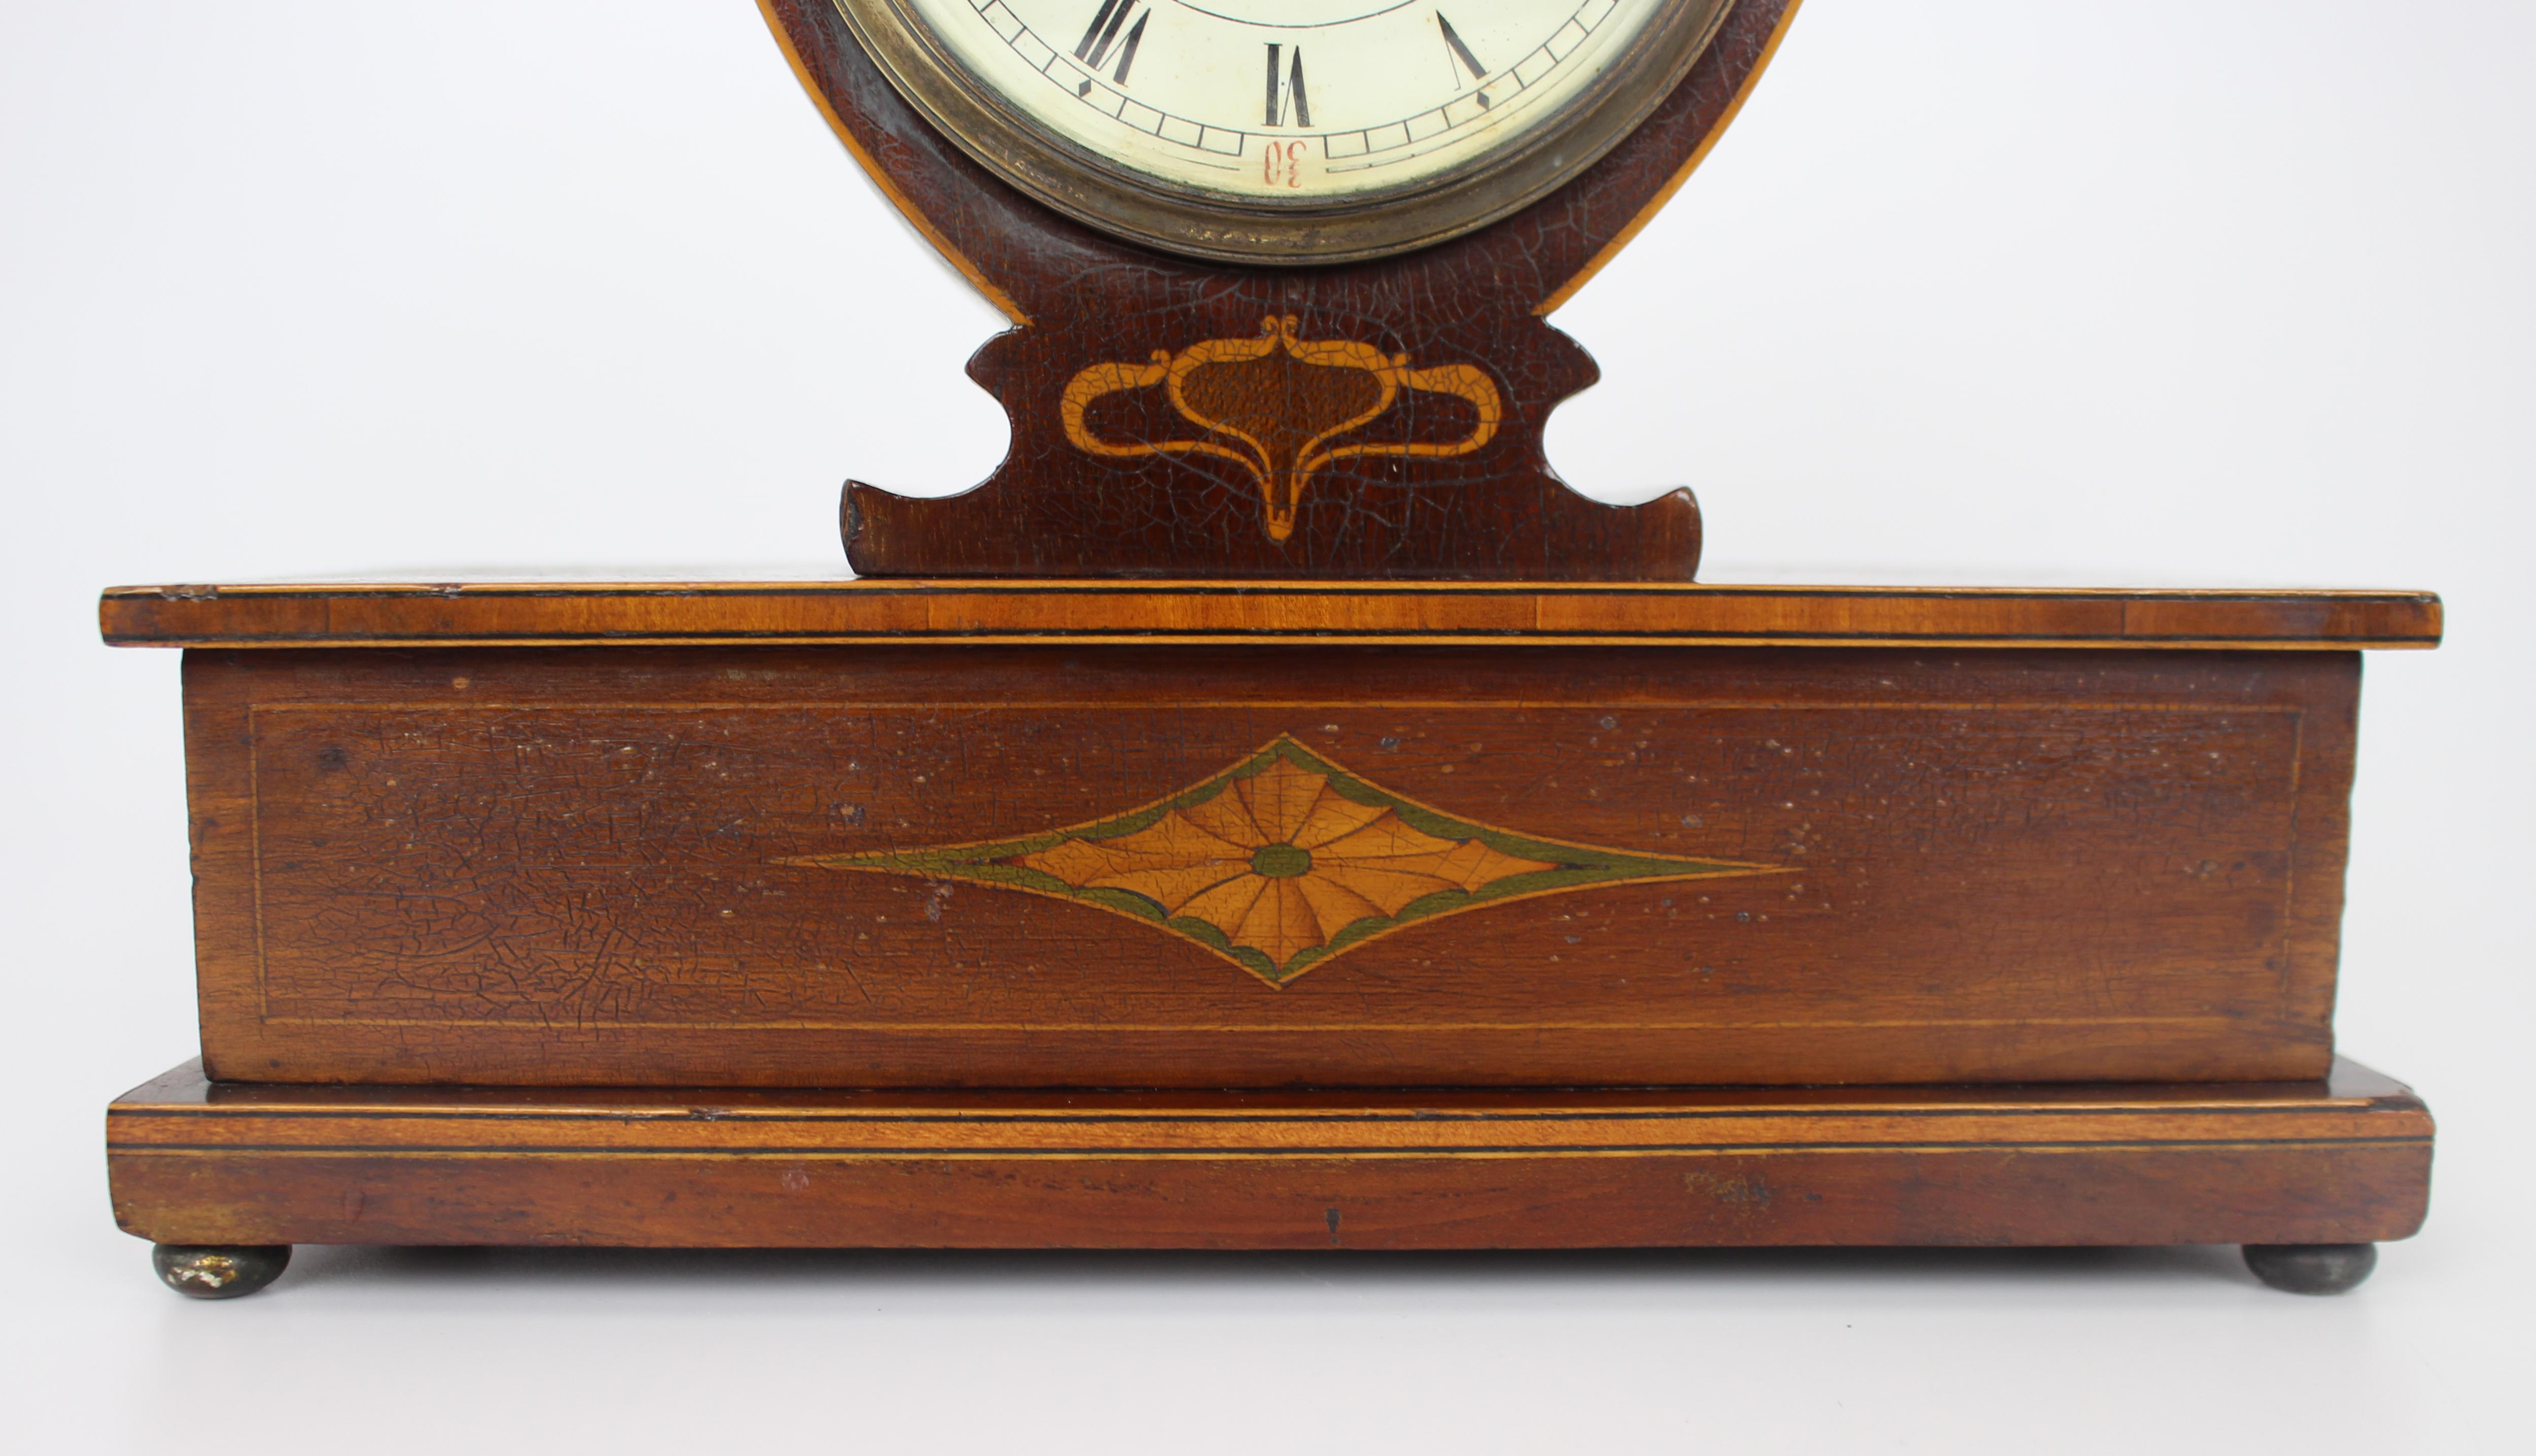 Elegant Inlaid Mahogany Mantle Clock by Wray, Son & Perry c.1900 For Sale 3